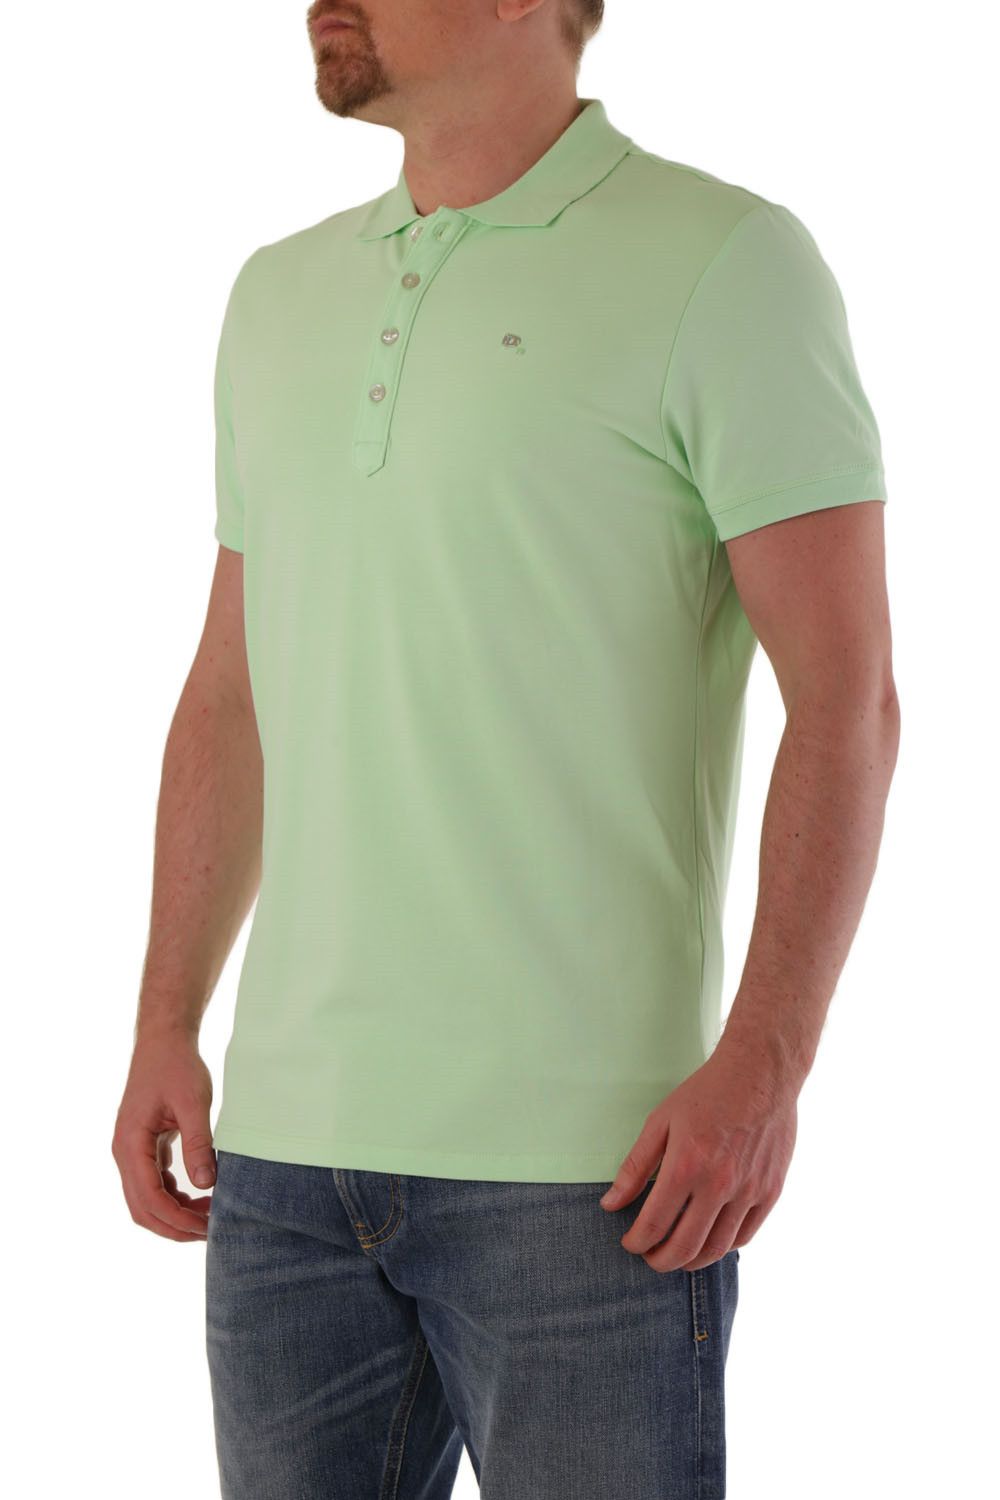 Brand: Diesel Gender: Men Type: Polo Season: Spring/Summer  PRODUCT DETAIL • Color: green • Fastening: buttons • Sleeves: short • Collar: polo  COMPOSITION AND MATERIAL • Composition: -95% cotton  •  Washing: machine wash at 30°